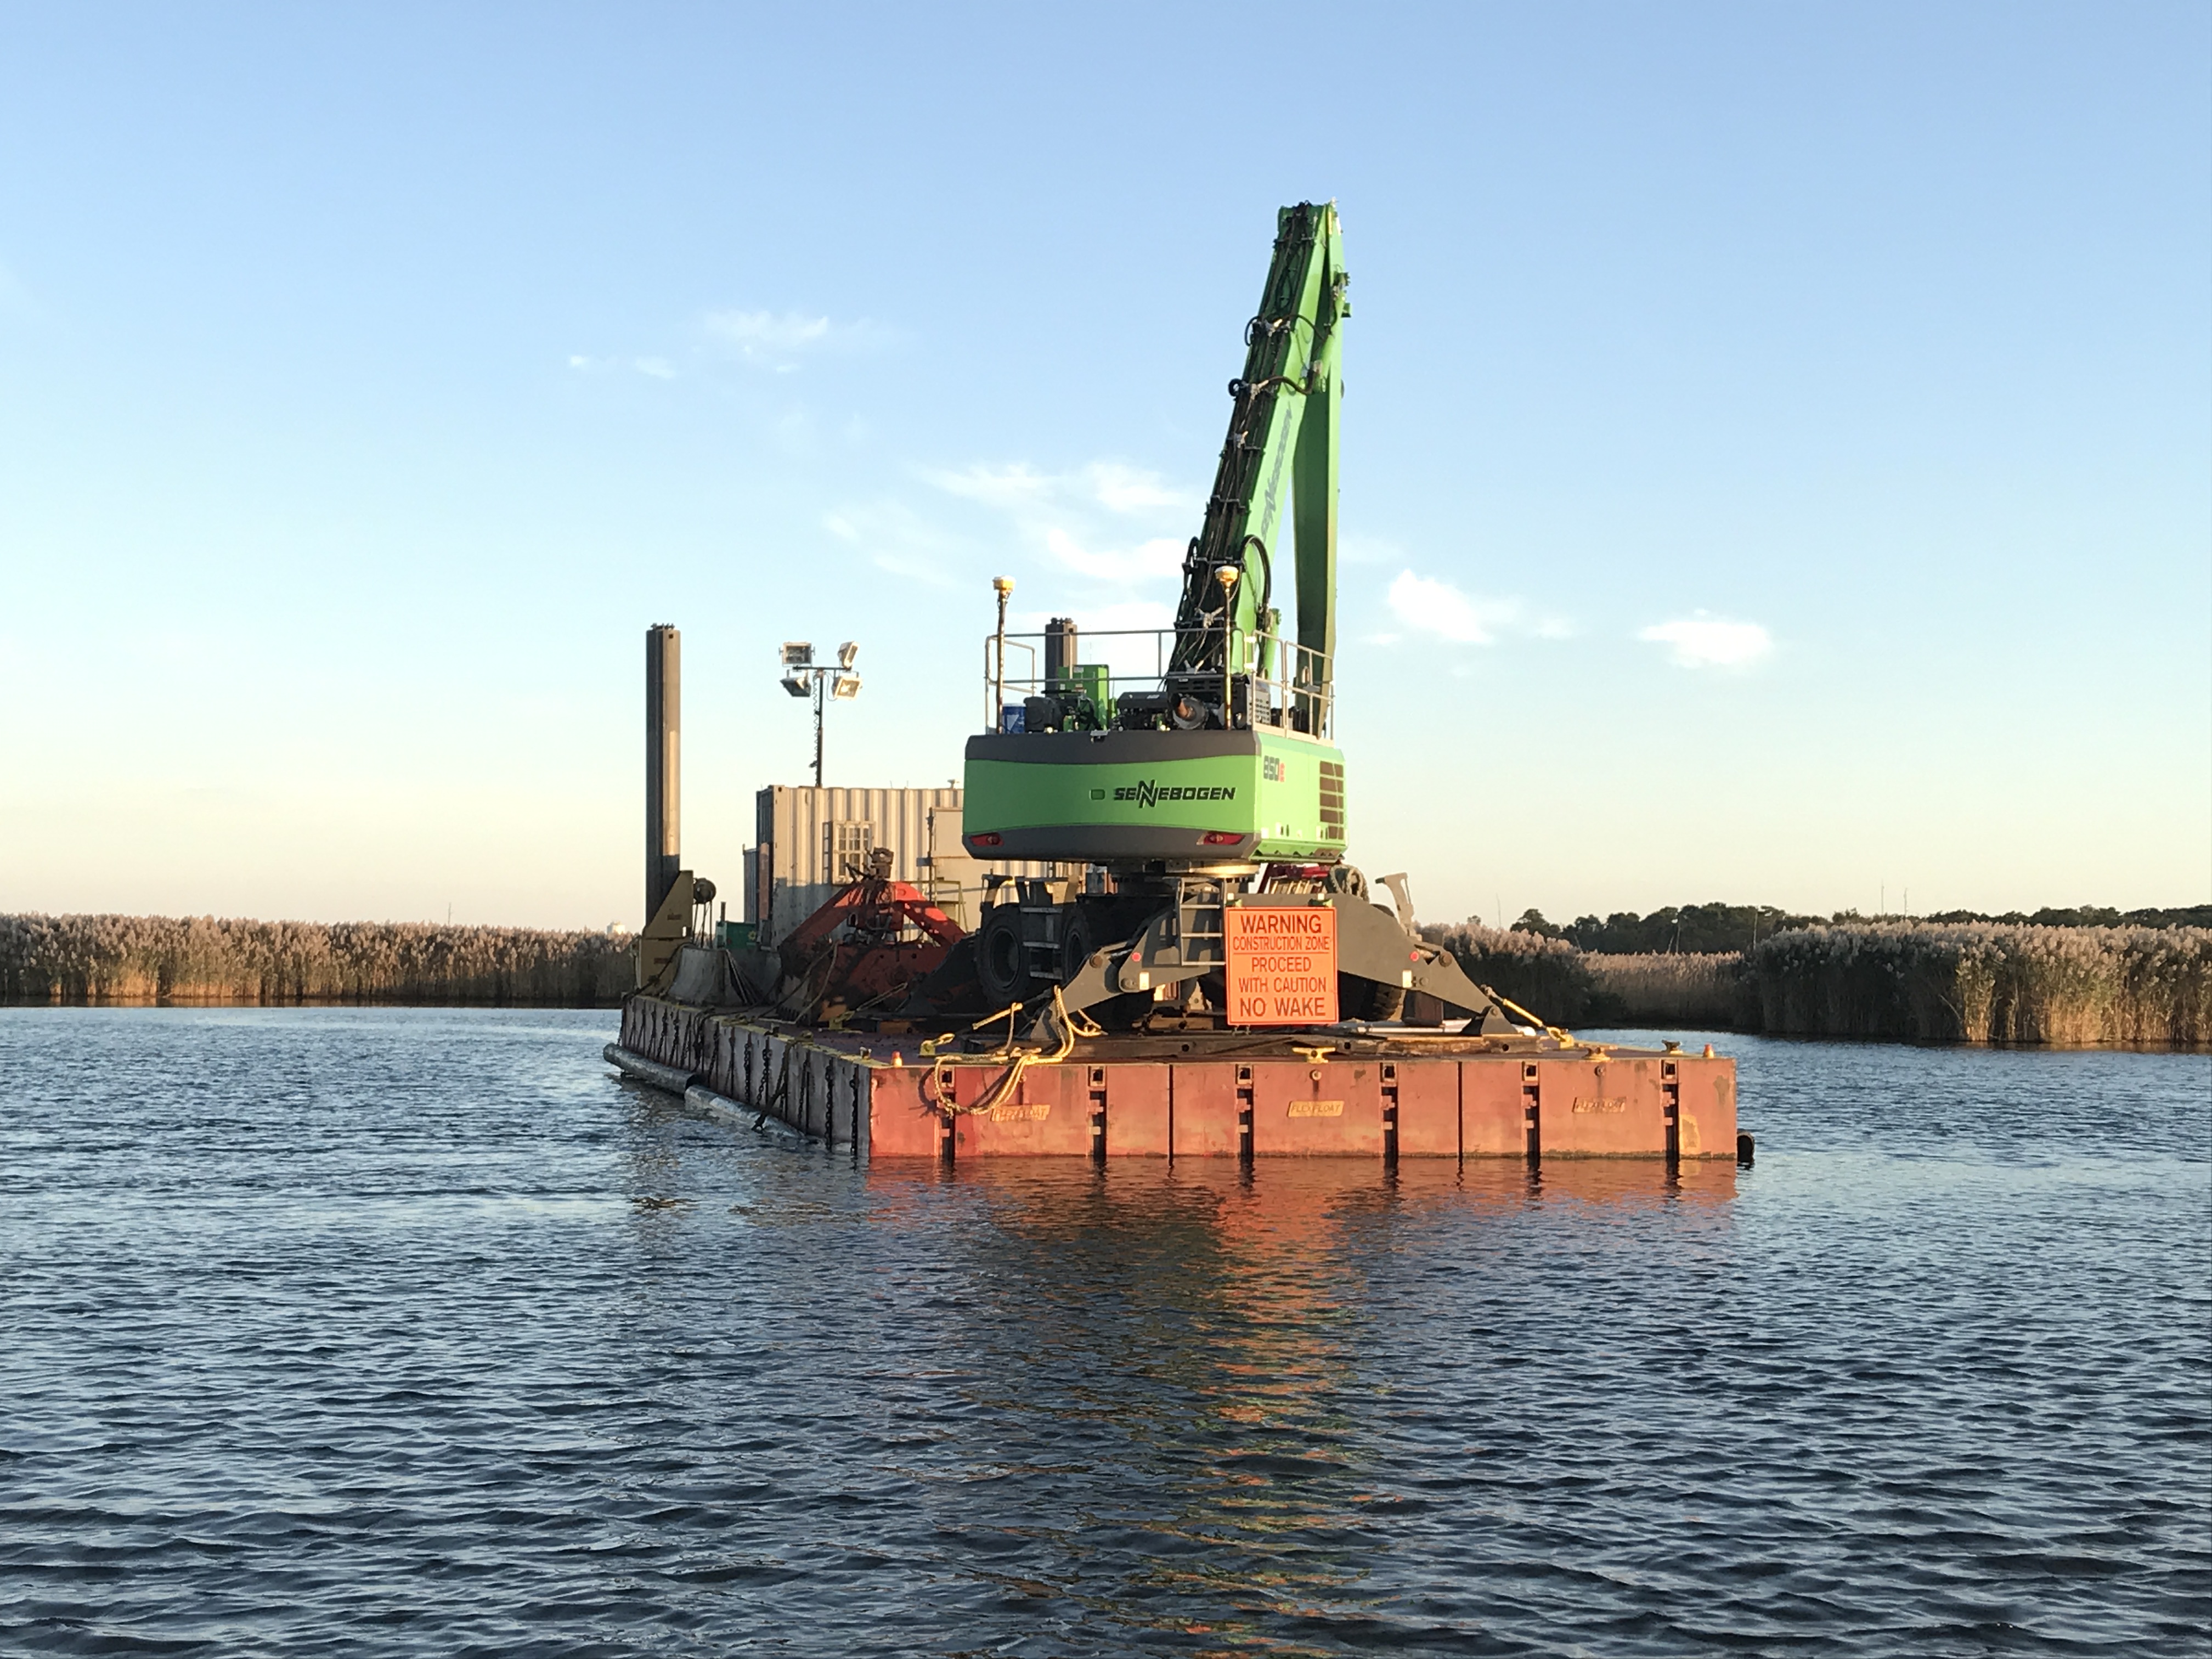 A dredge barge rests in the narrows of the Metedeconk River on Oct. 16, 2019. (Photo: Daniel Nee)